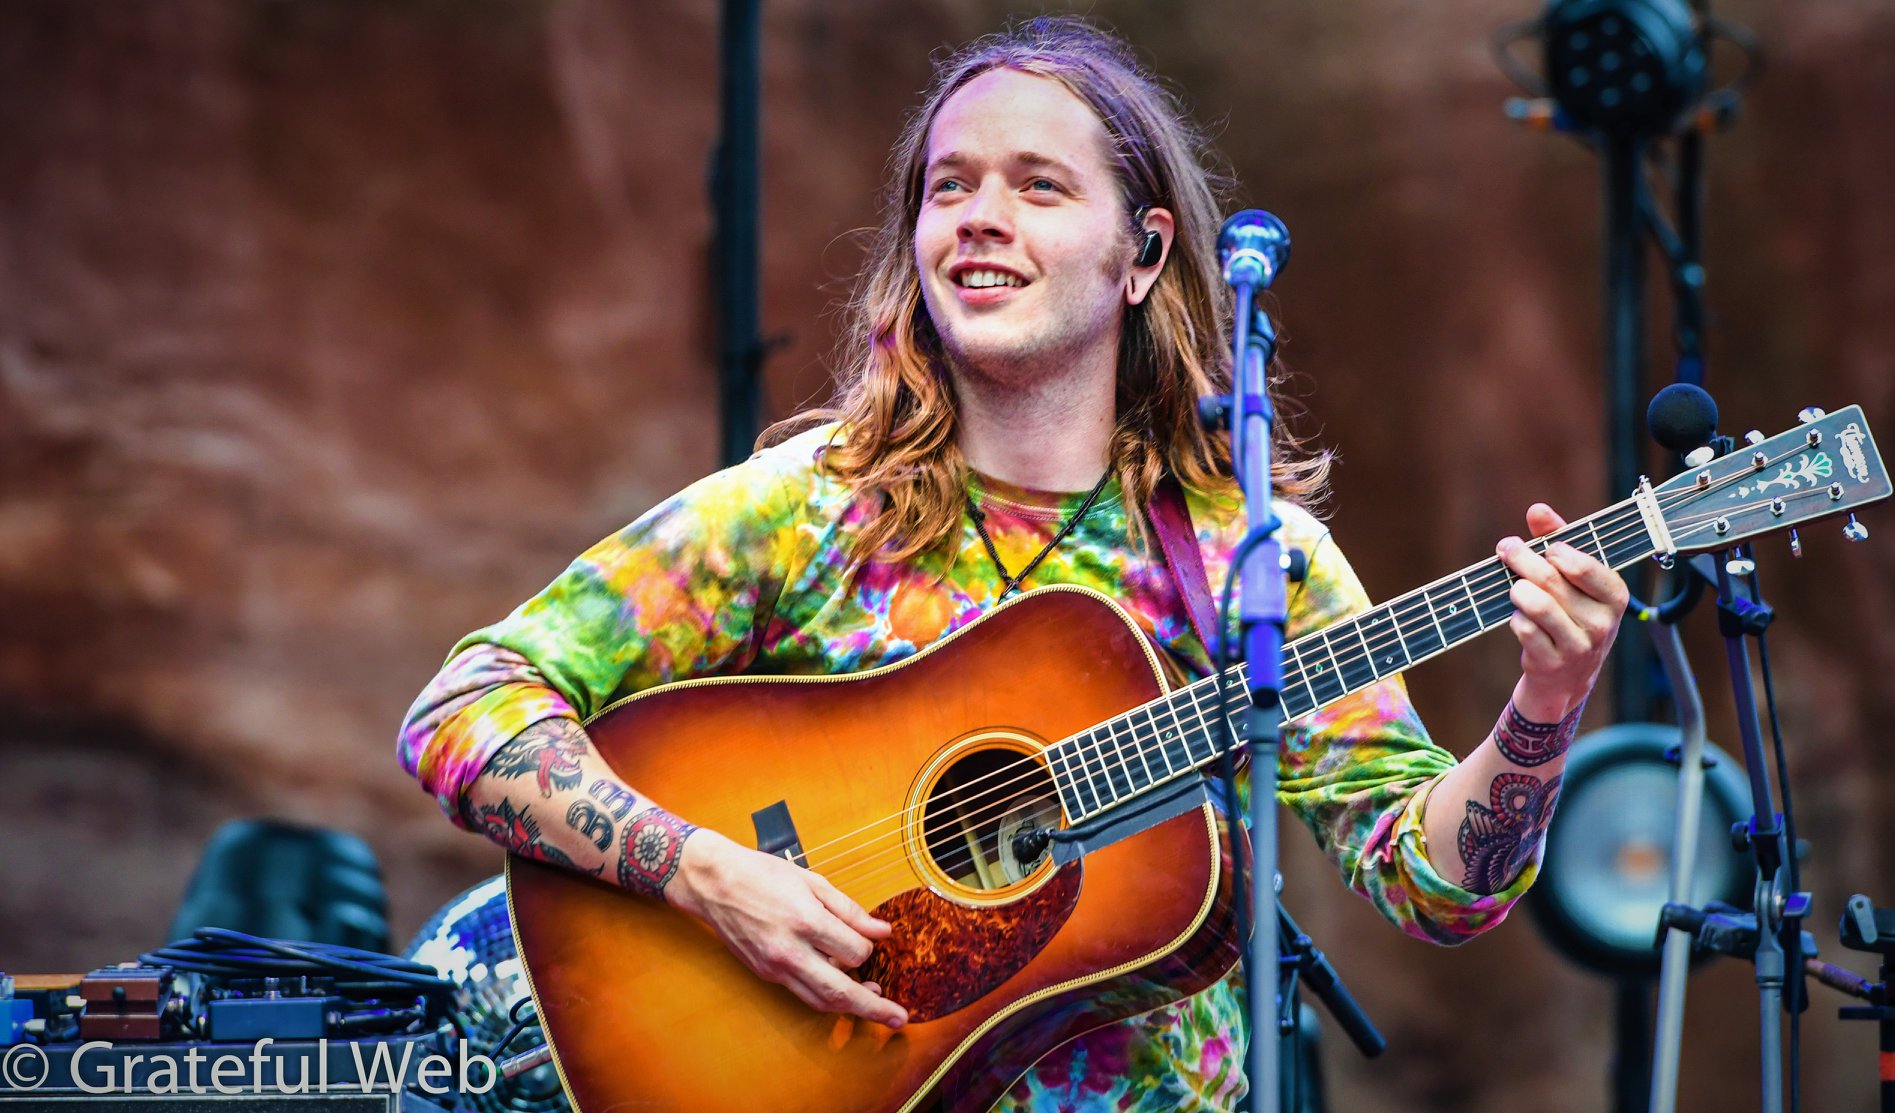 Billy Strings wins Artist of the Year at 2022 Americana Music Awards